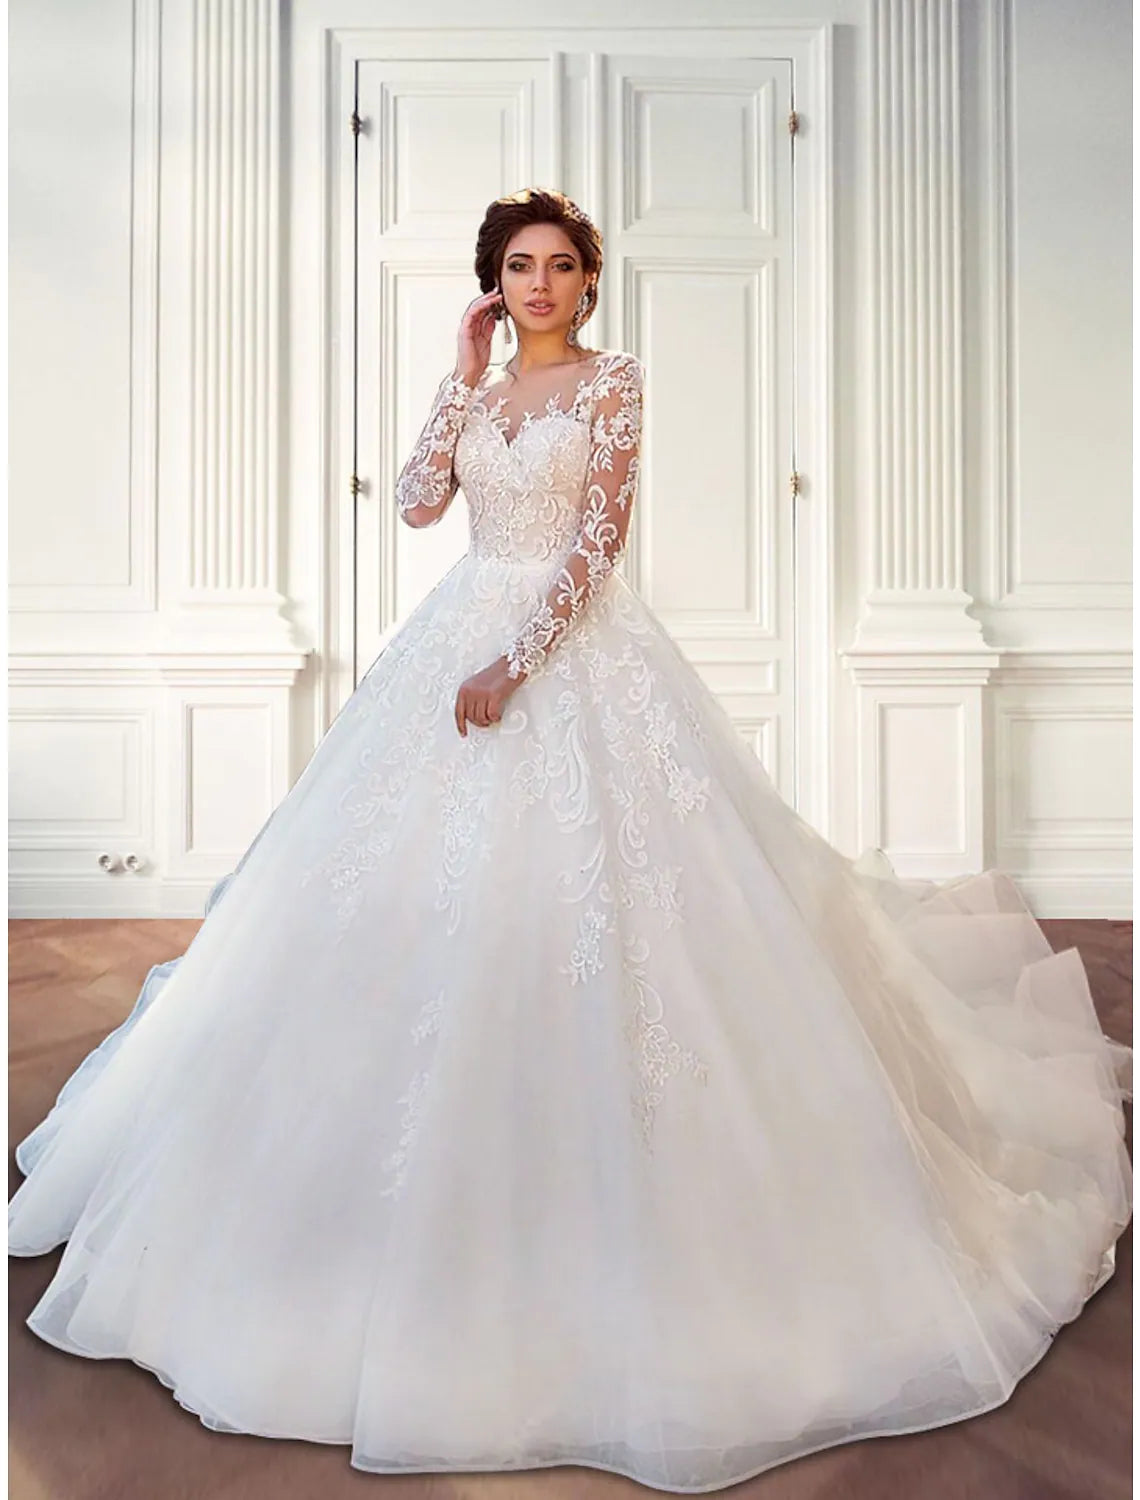 Engagement Formal Wedding Dresses Ball Gown Long Sleeve Lace Appliques ...